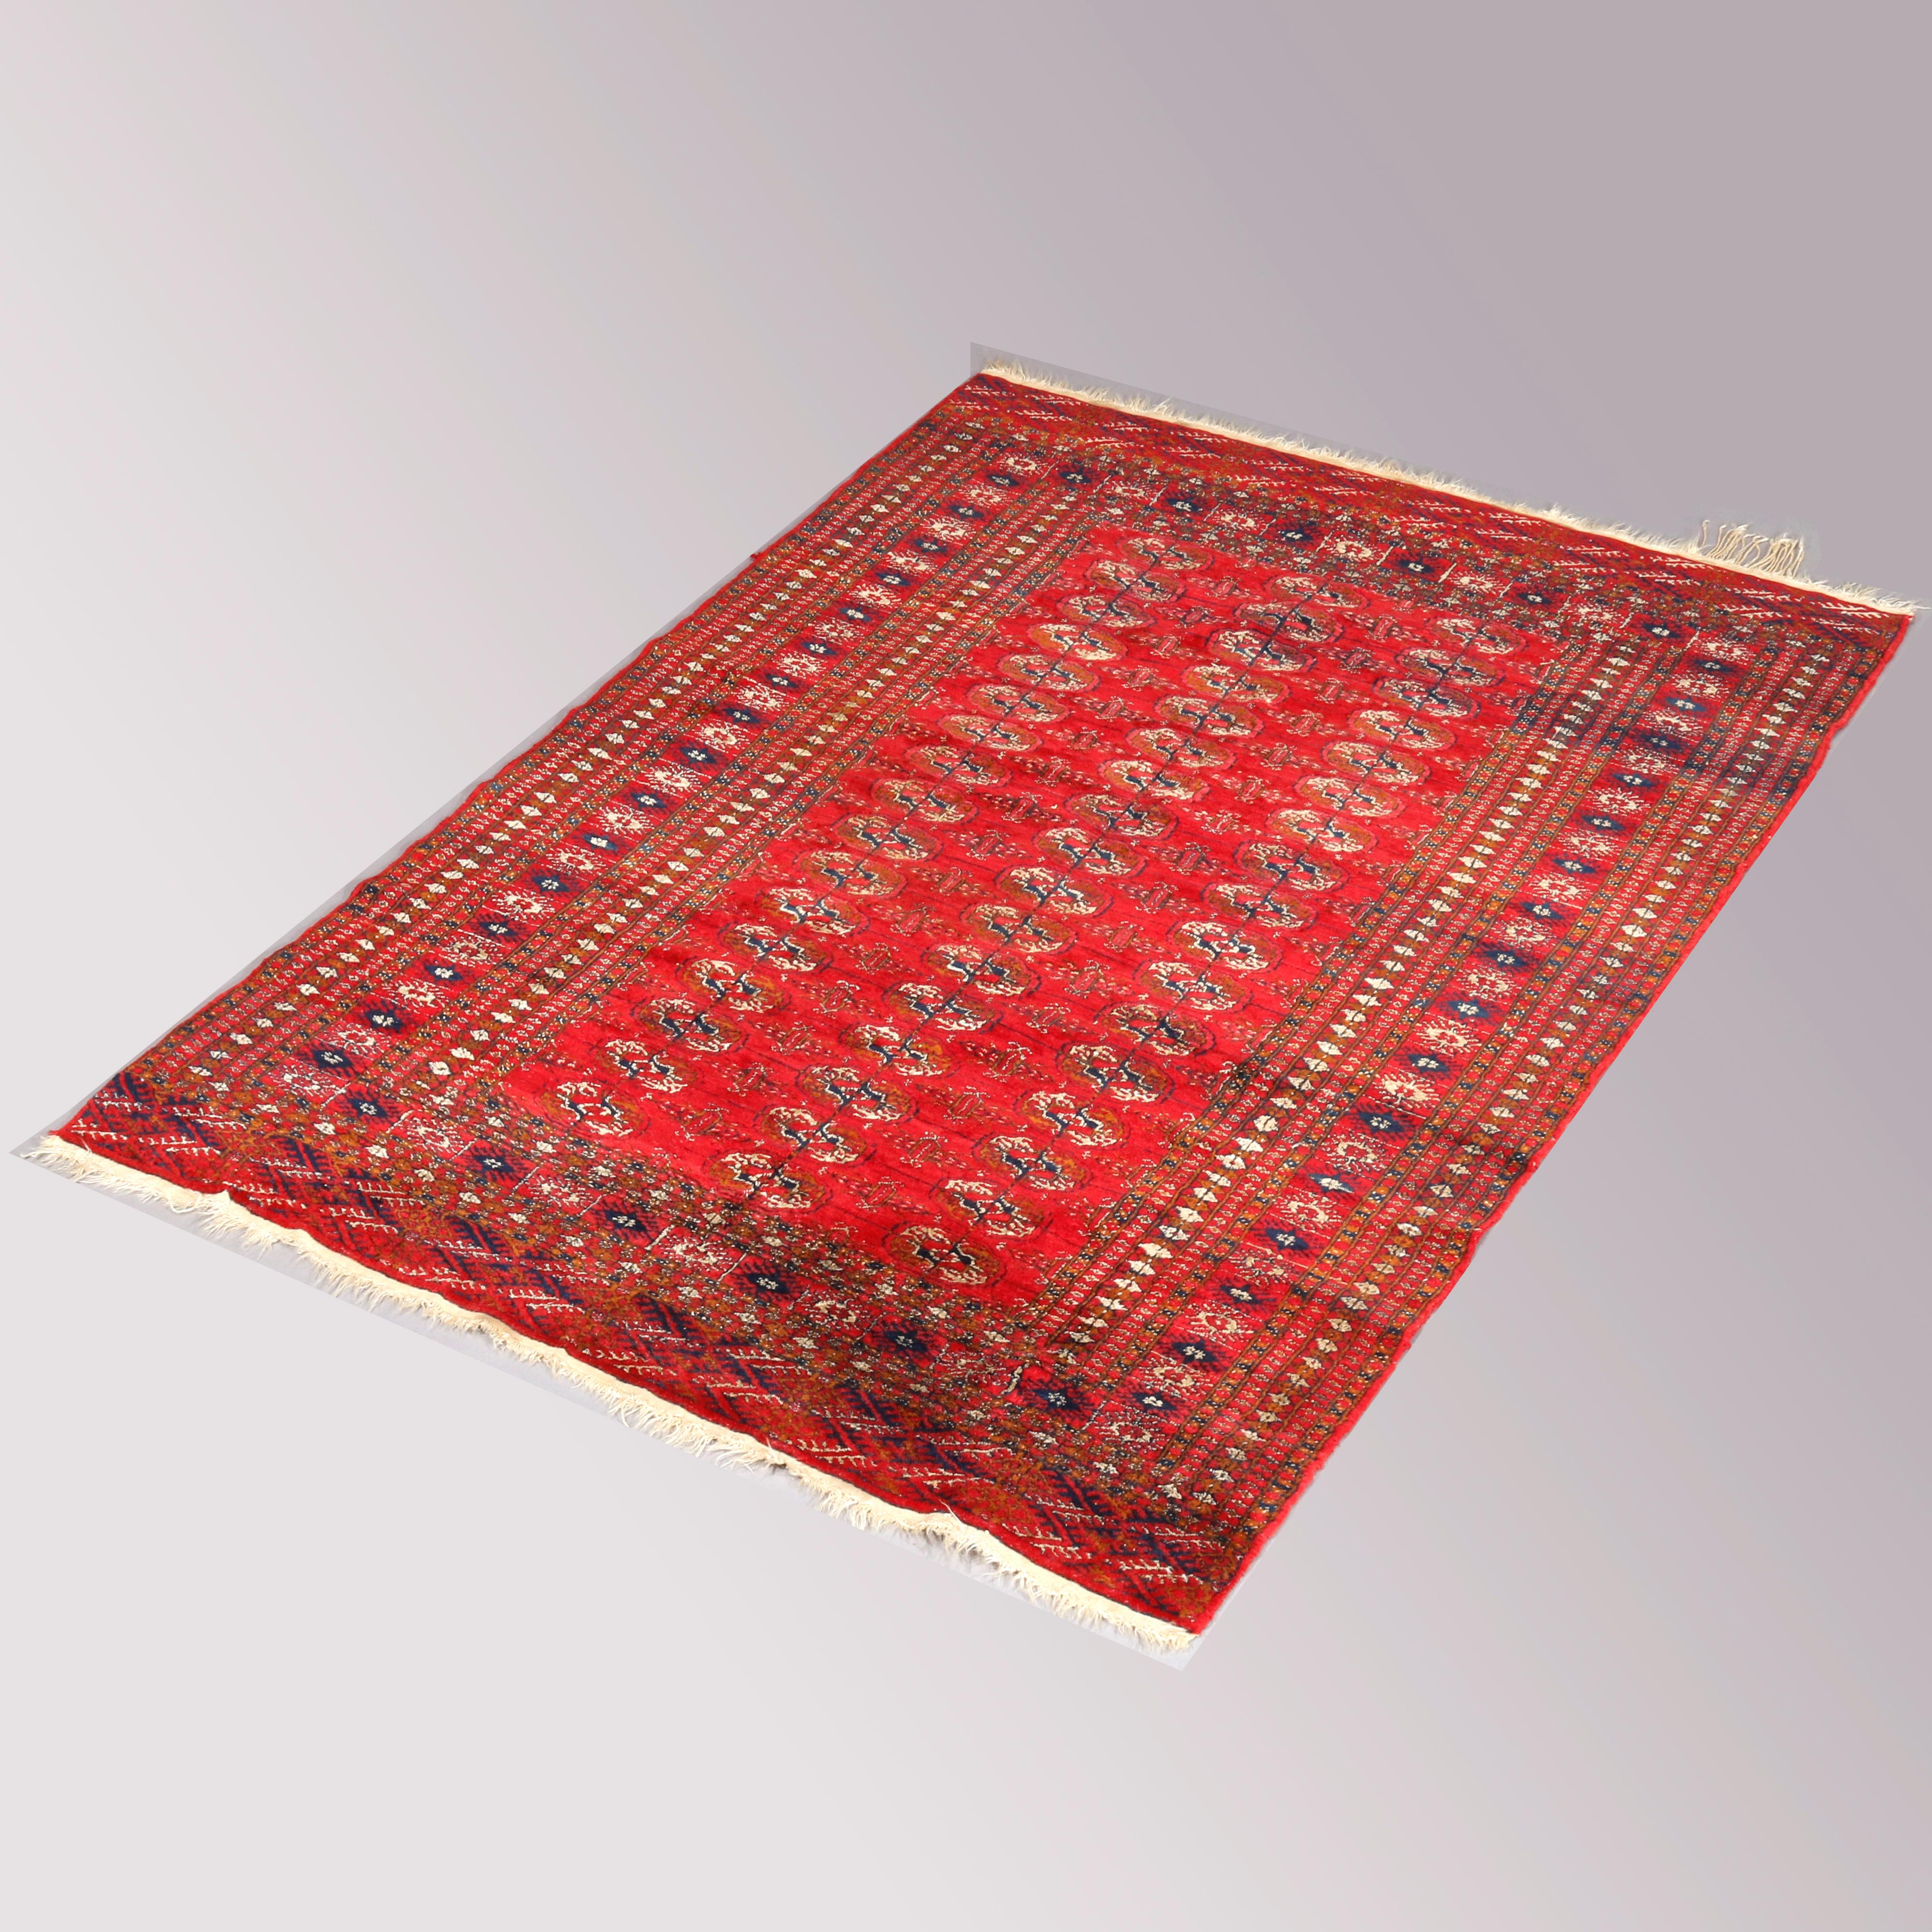 An antique Persian Bokhara nomadic tribal Oriental rug offers wool construction with all-over geometric pattern on red ground, circa 1920

Measures: 73